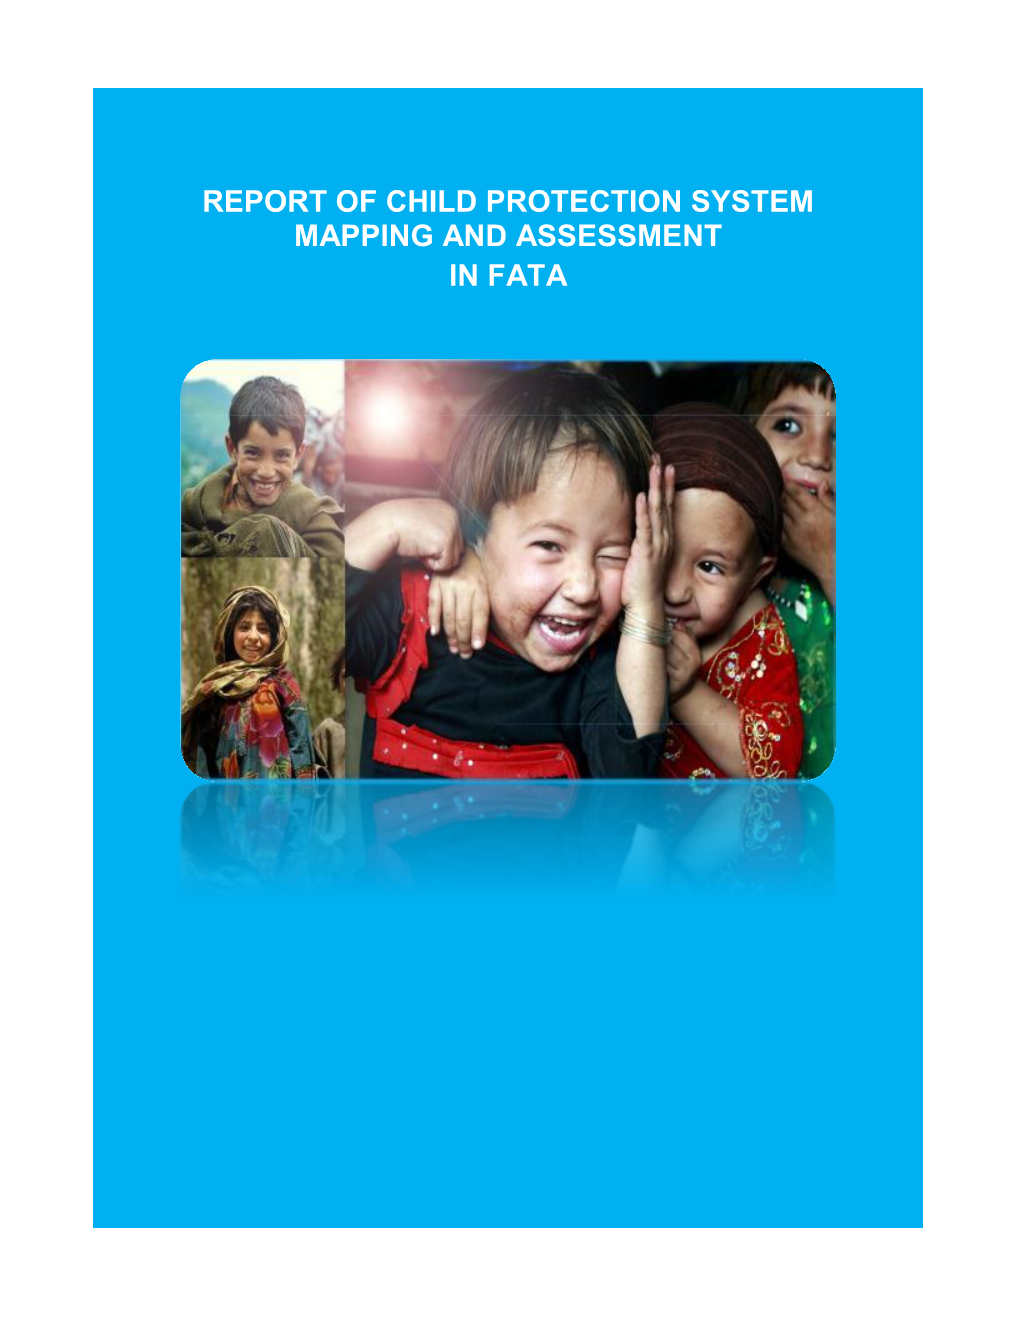 Report of Child Protection System Mapping and Assessment in Fata